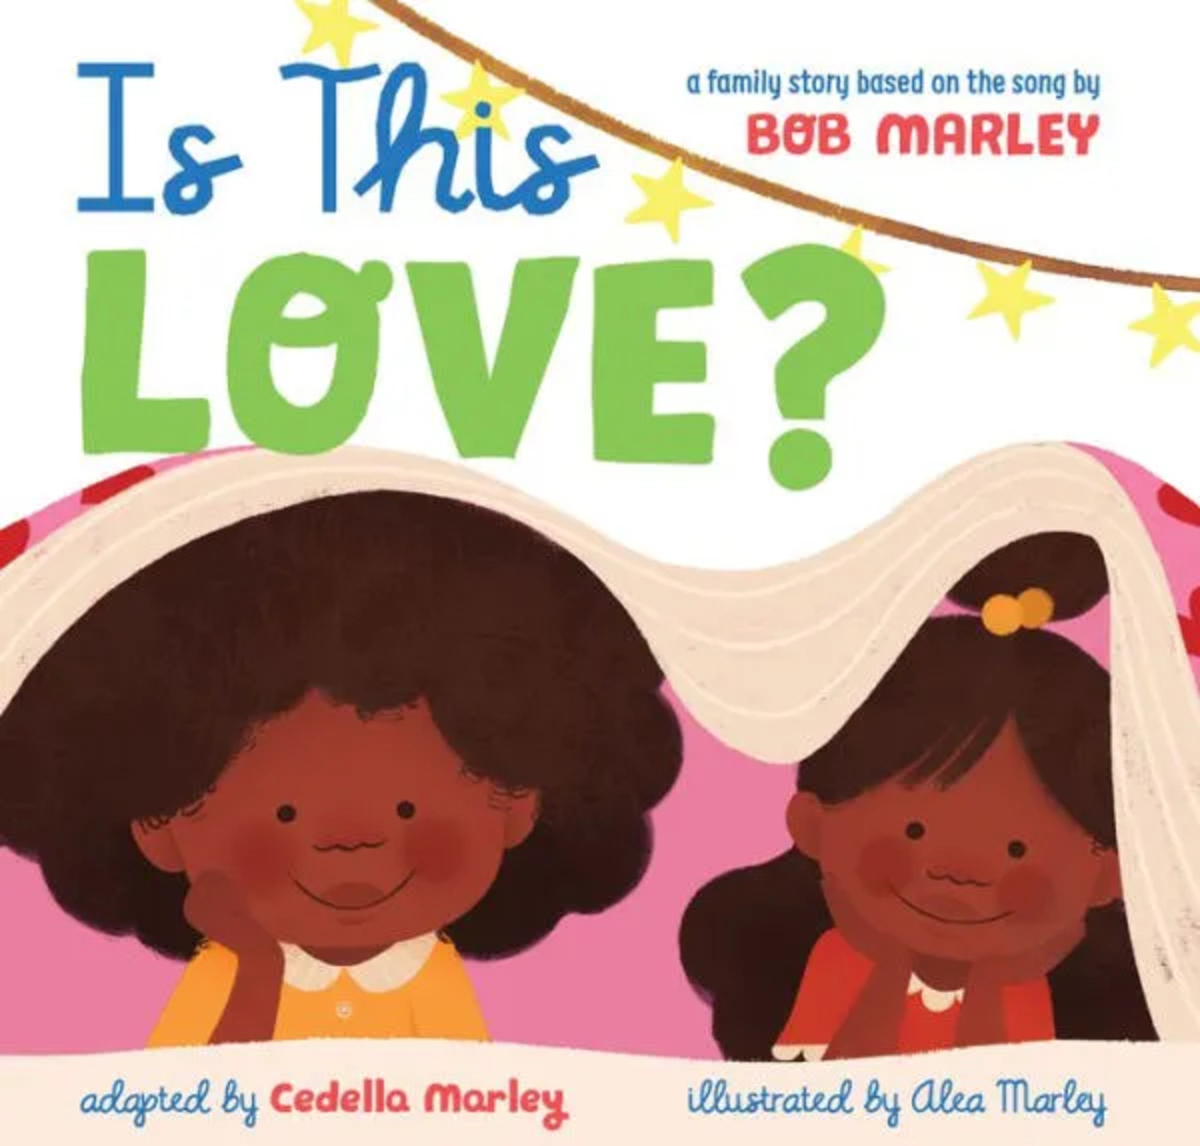 OUT NOW!✨ Is This Love? A family story based on the iconic song by Bob Marley. Illustrated by #BrightArtist @aleamarley! -- Written by @cedellamarley | @ChronicleBooks | Rep'd by #BrightAgent @childbookart chroniclebooks.com/products/is-th…